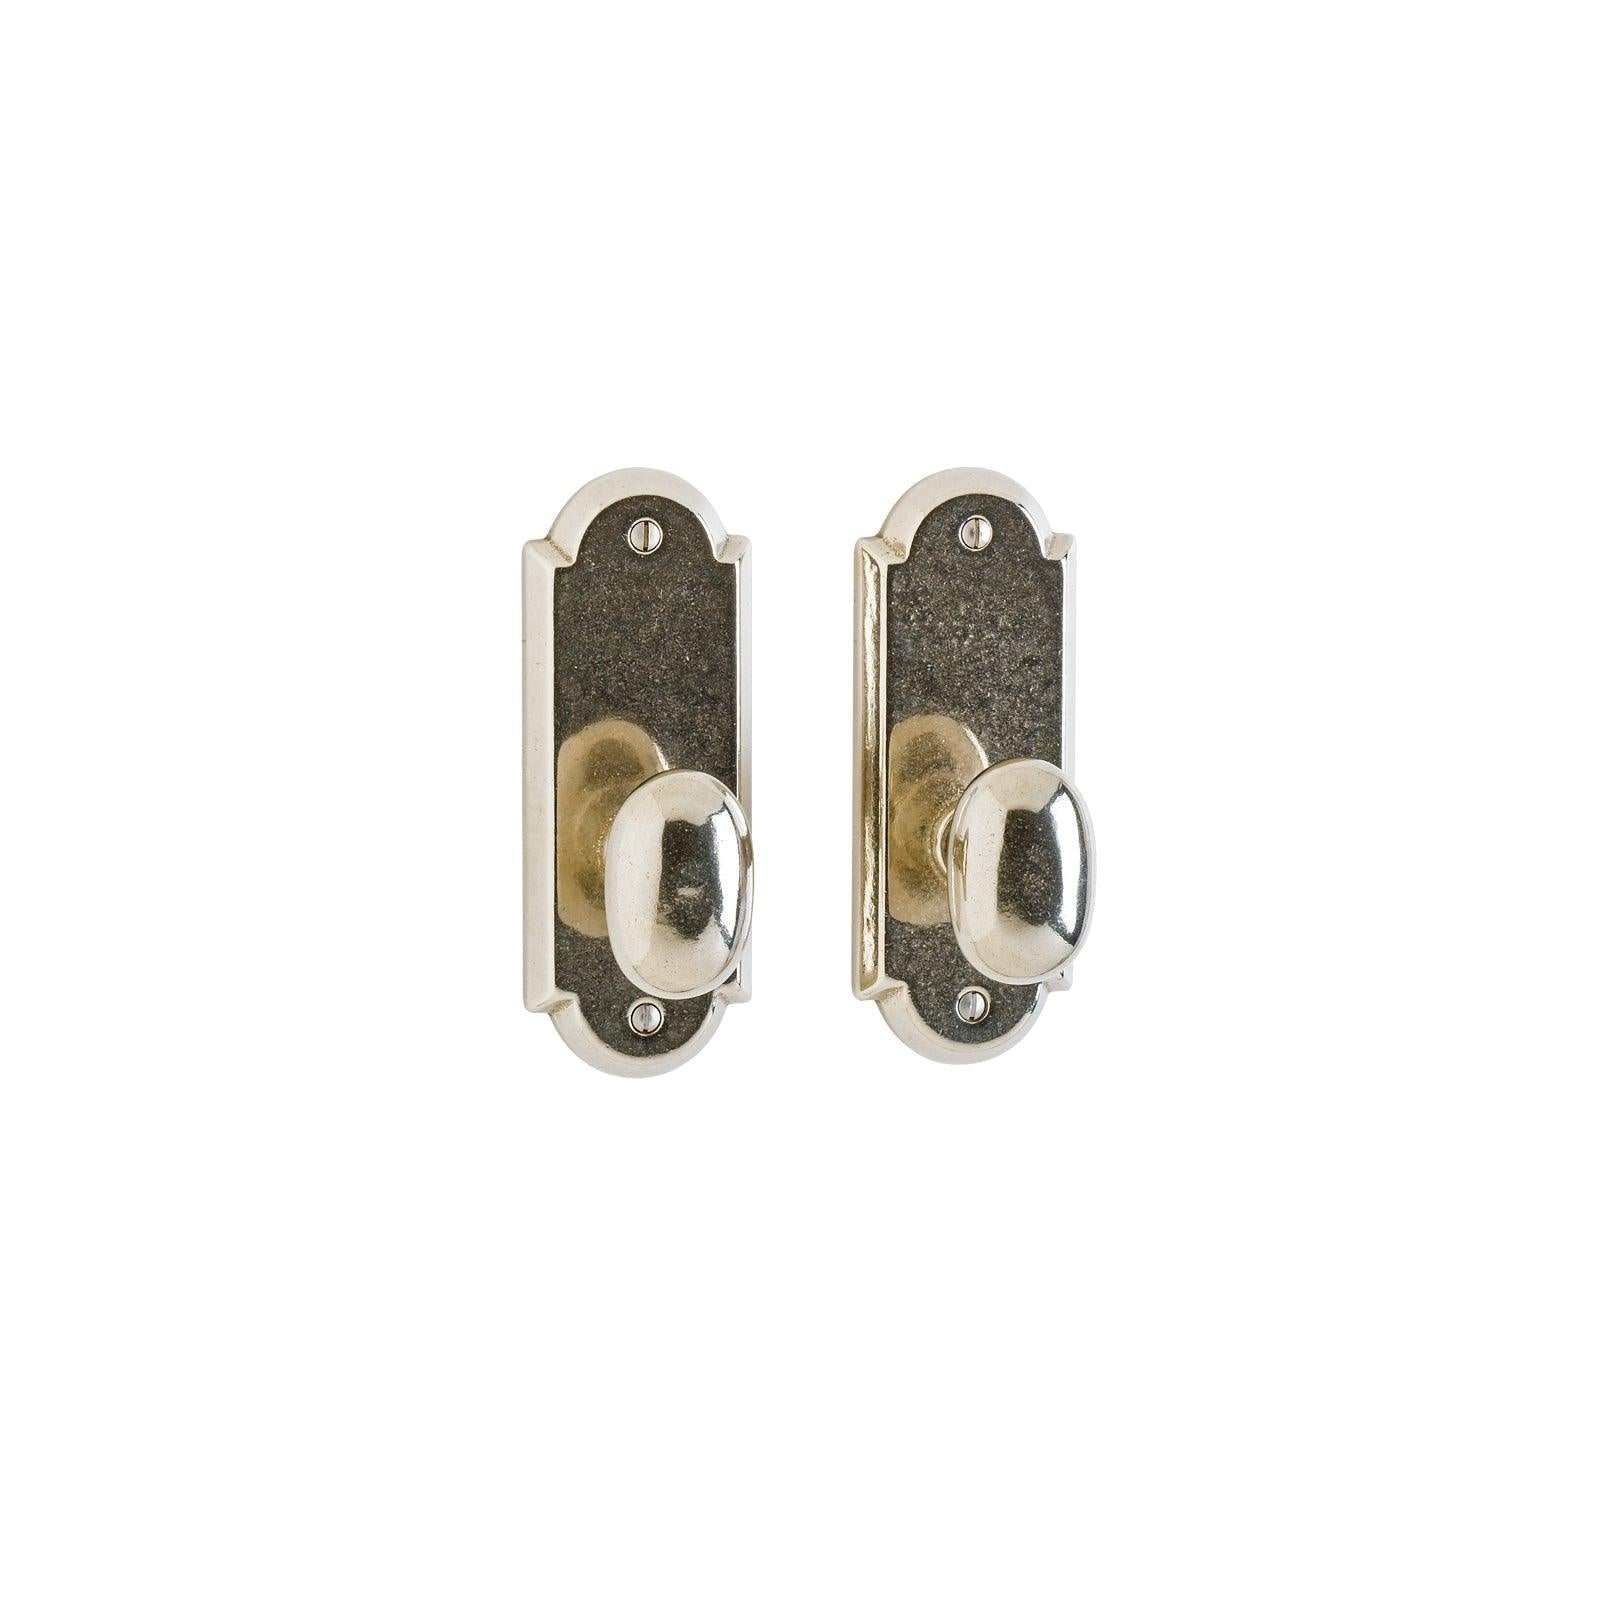 Arched Builder Series 2 1/2" x 6 1/2" EB75 Passage Mortise Lock - {{ show.name }}